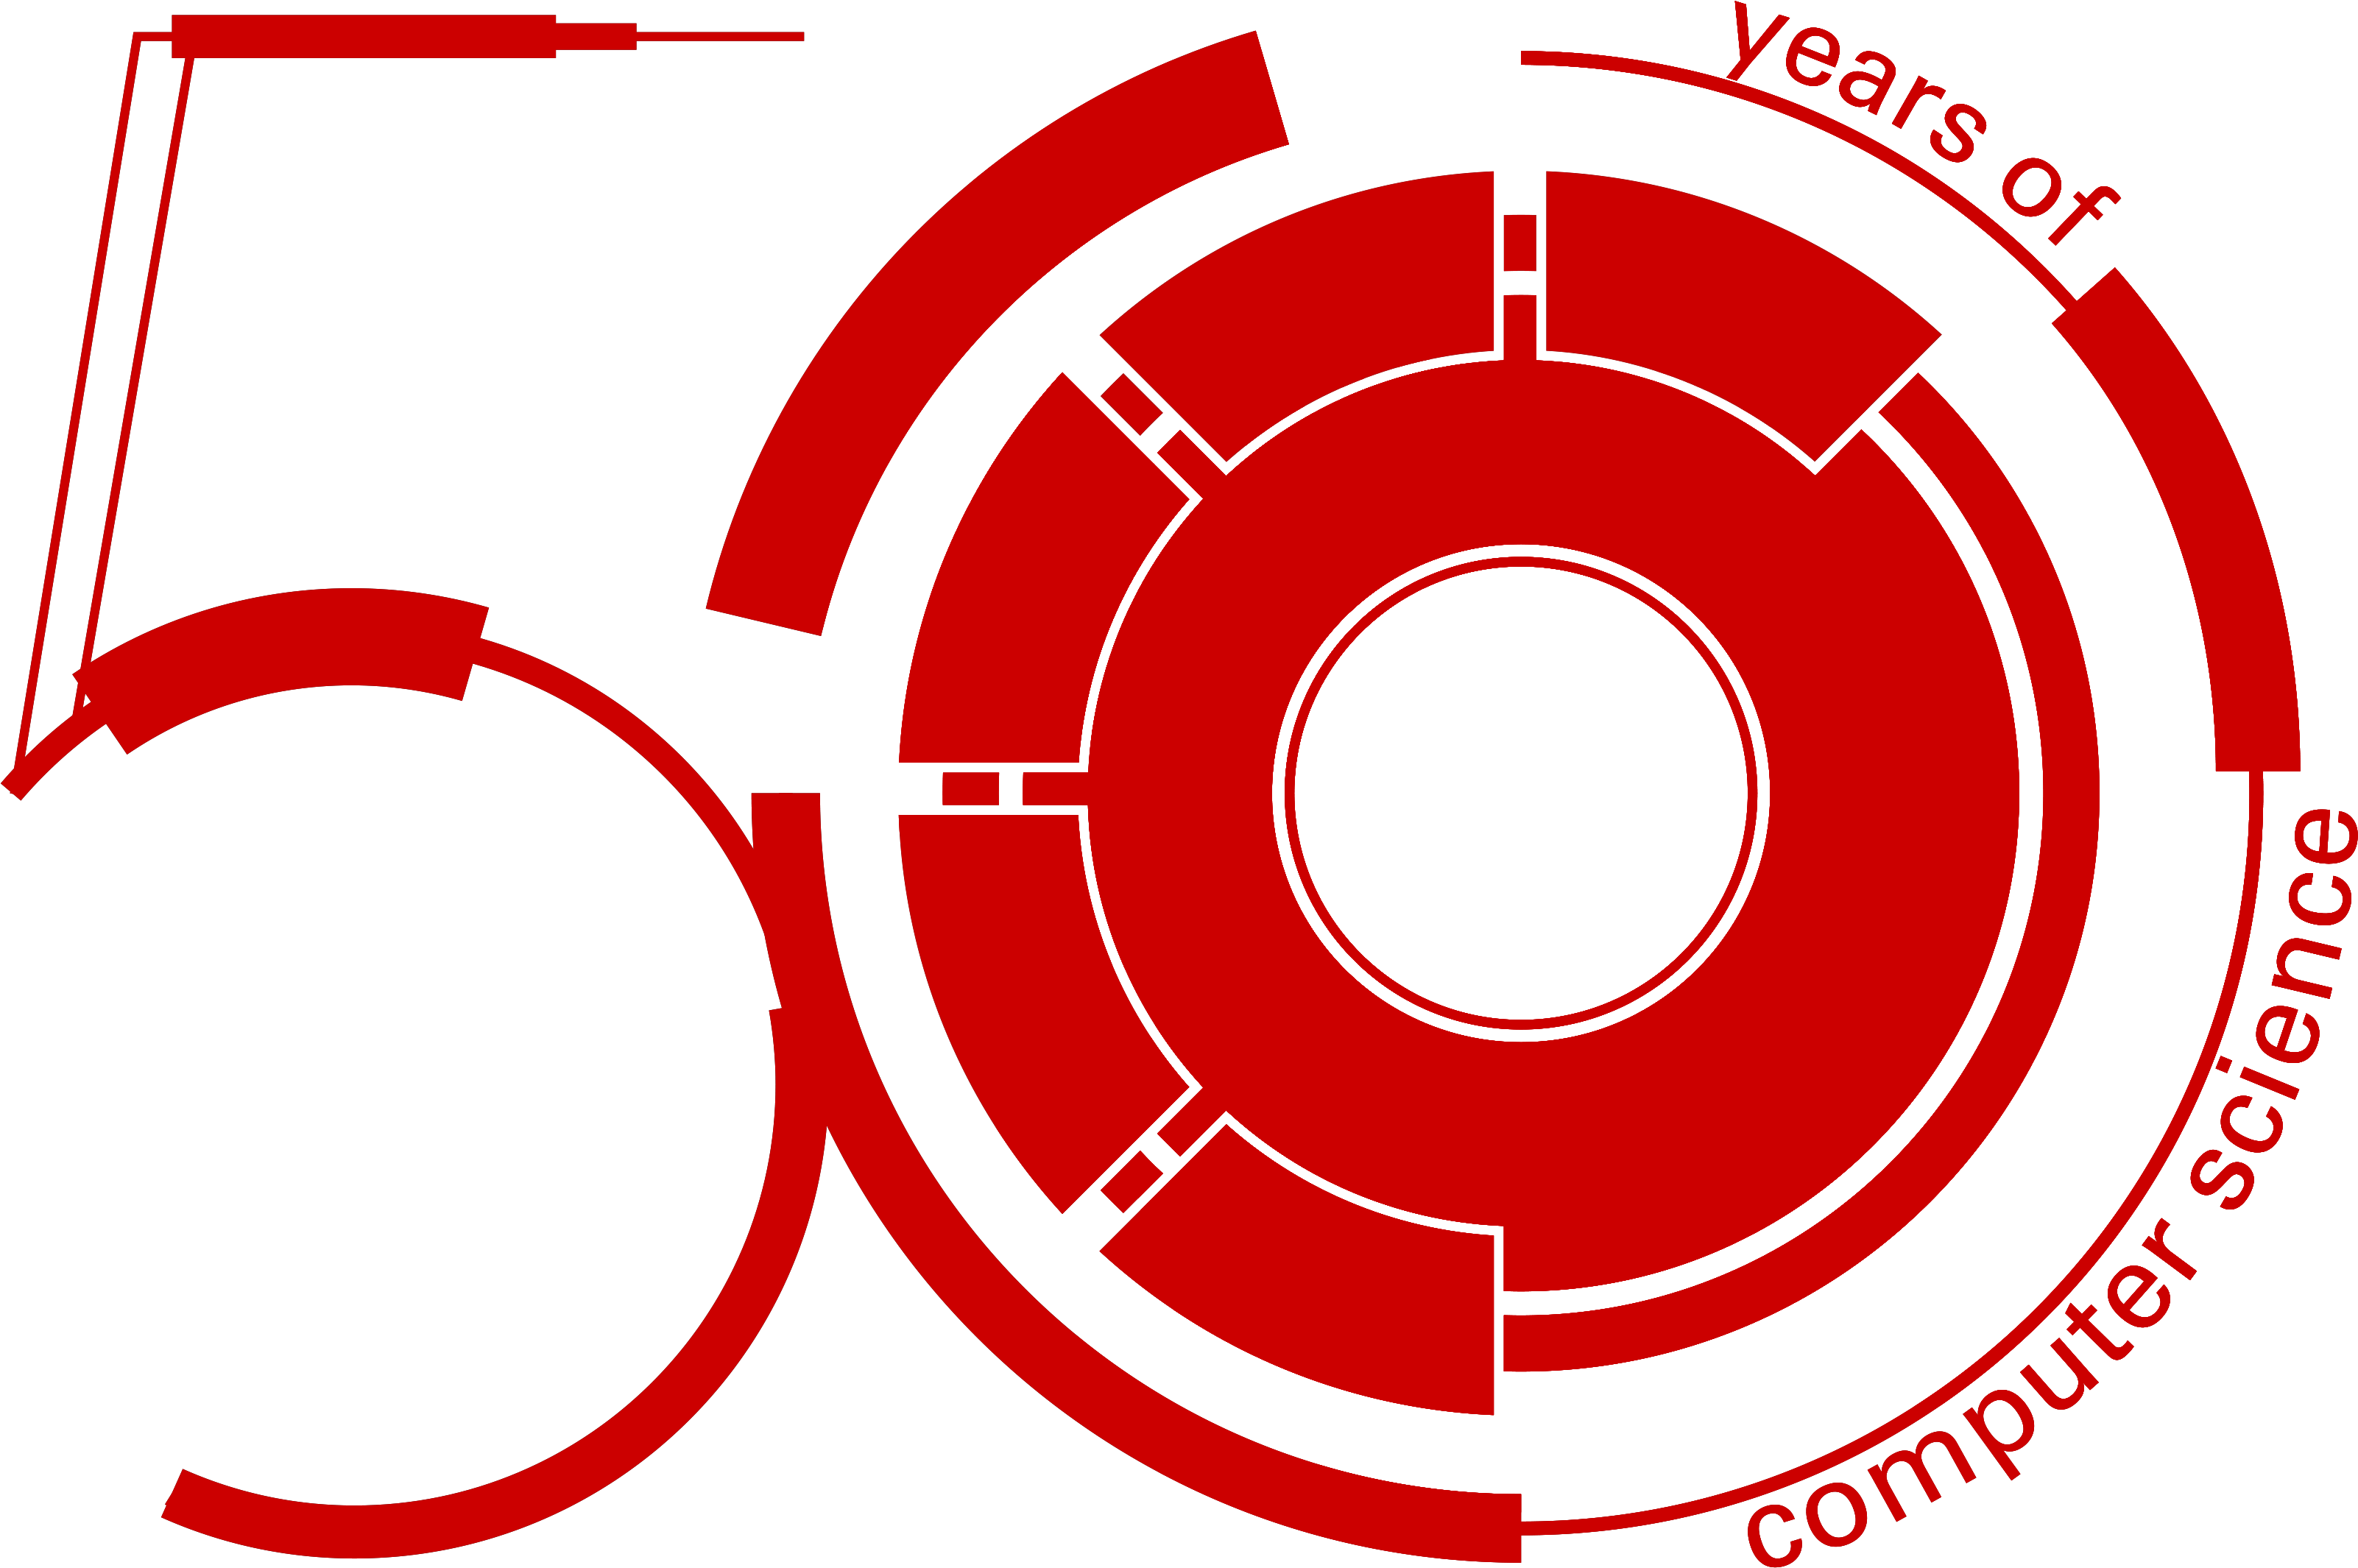 Students, Corporate Partners, Former Faculty & Staff, - Ncsu Computer Science 50 Years (3300x2550)